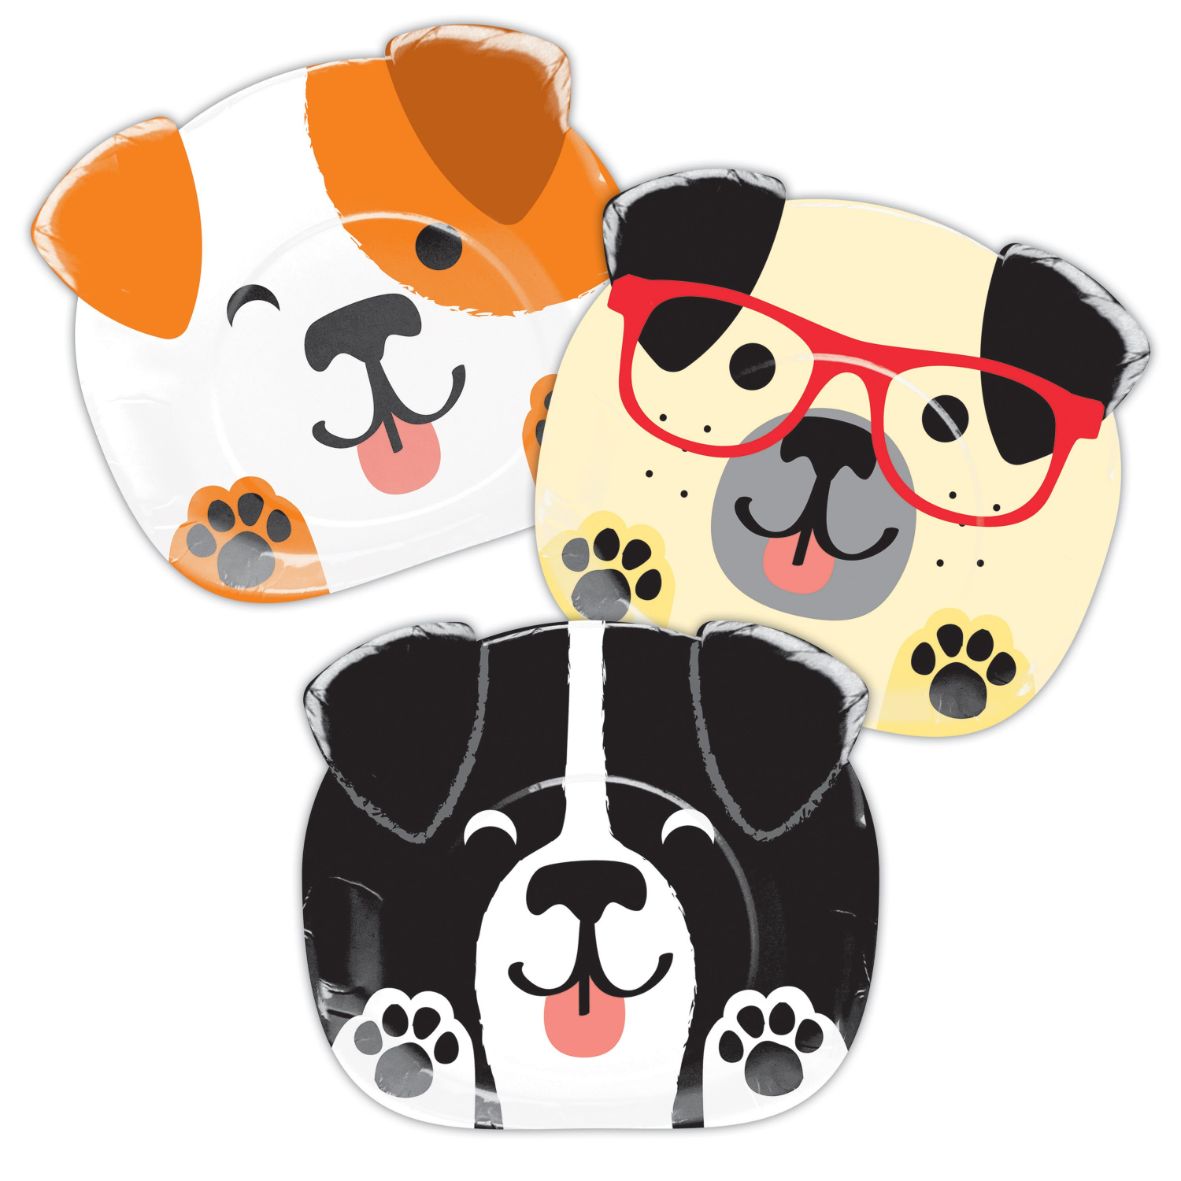 Dog Shaped Party Plates